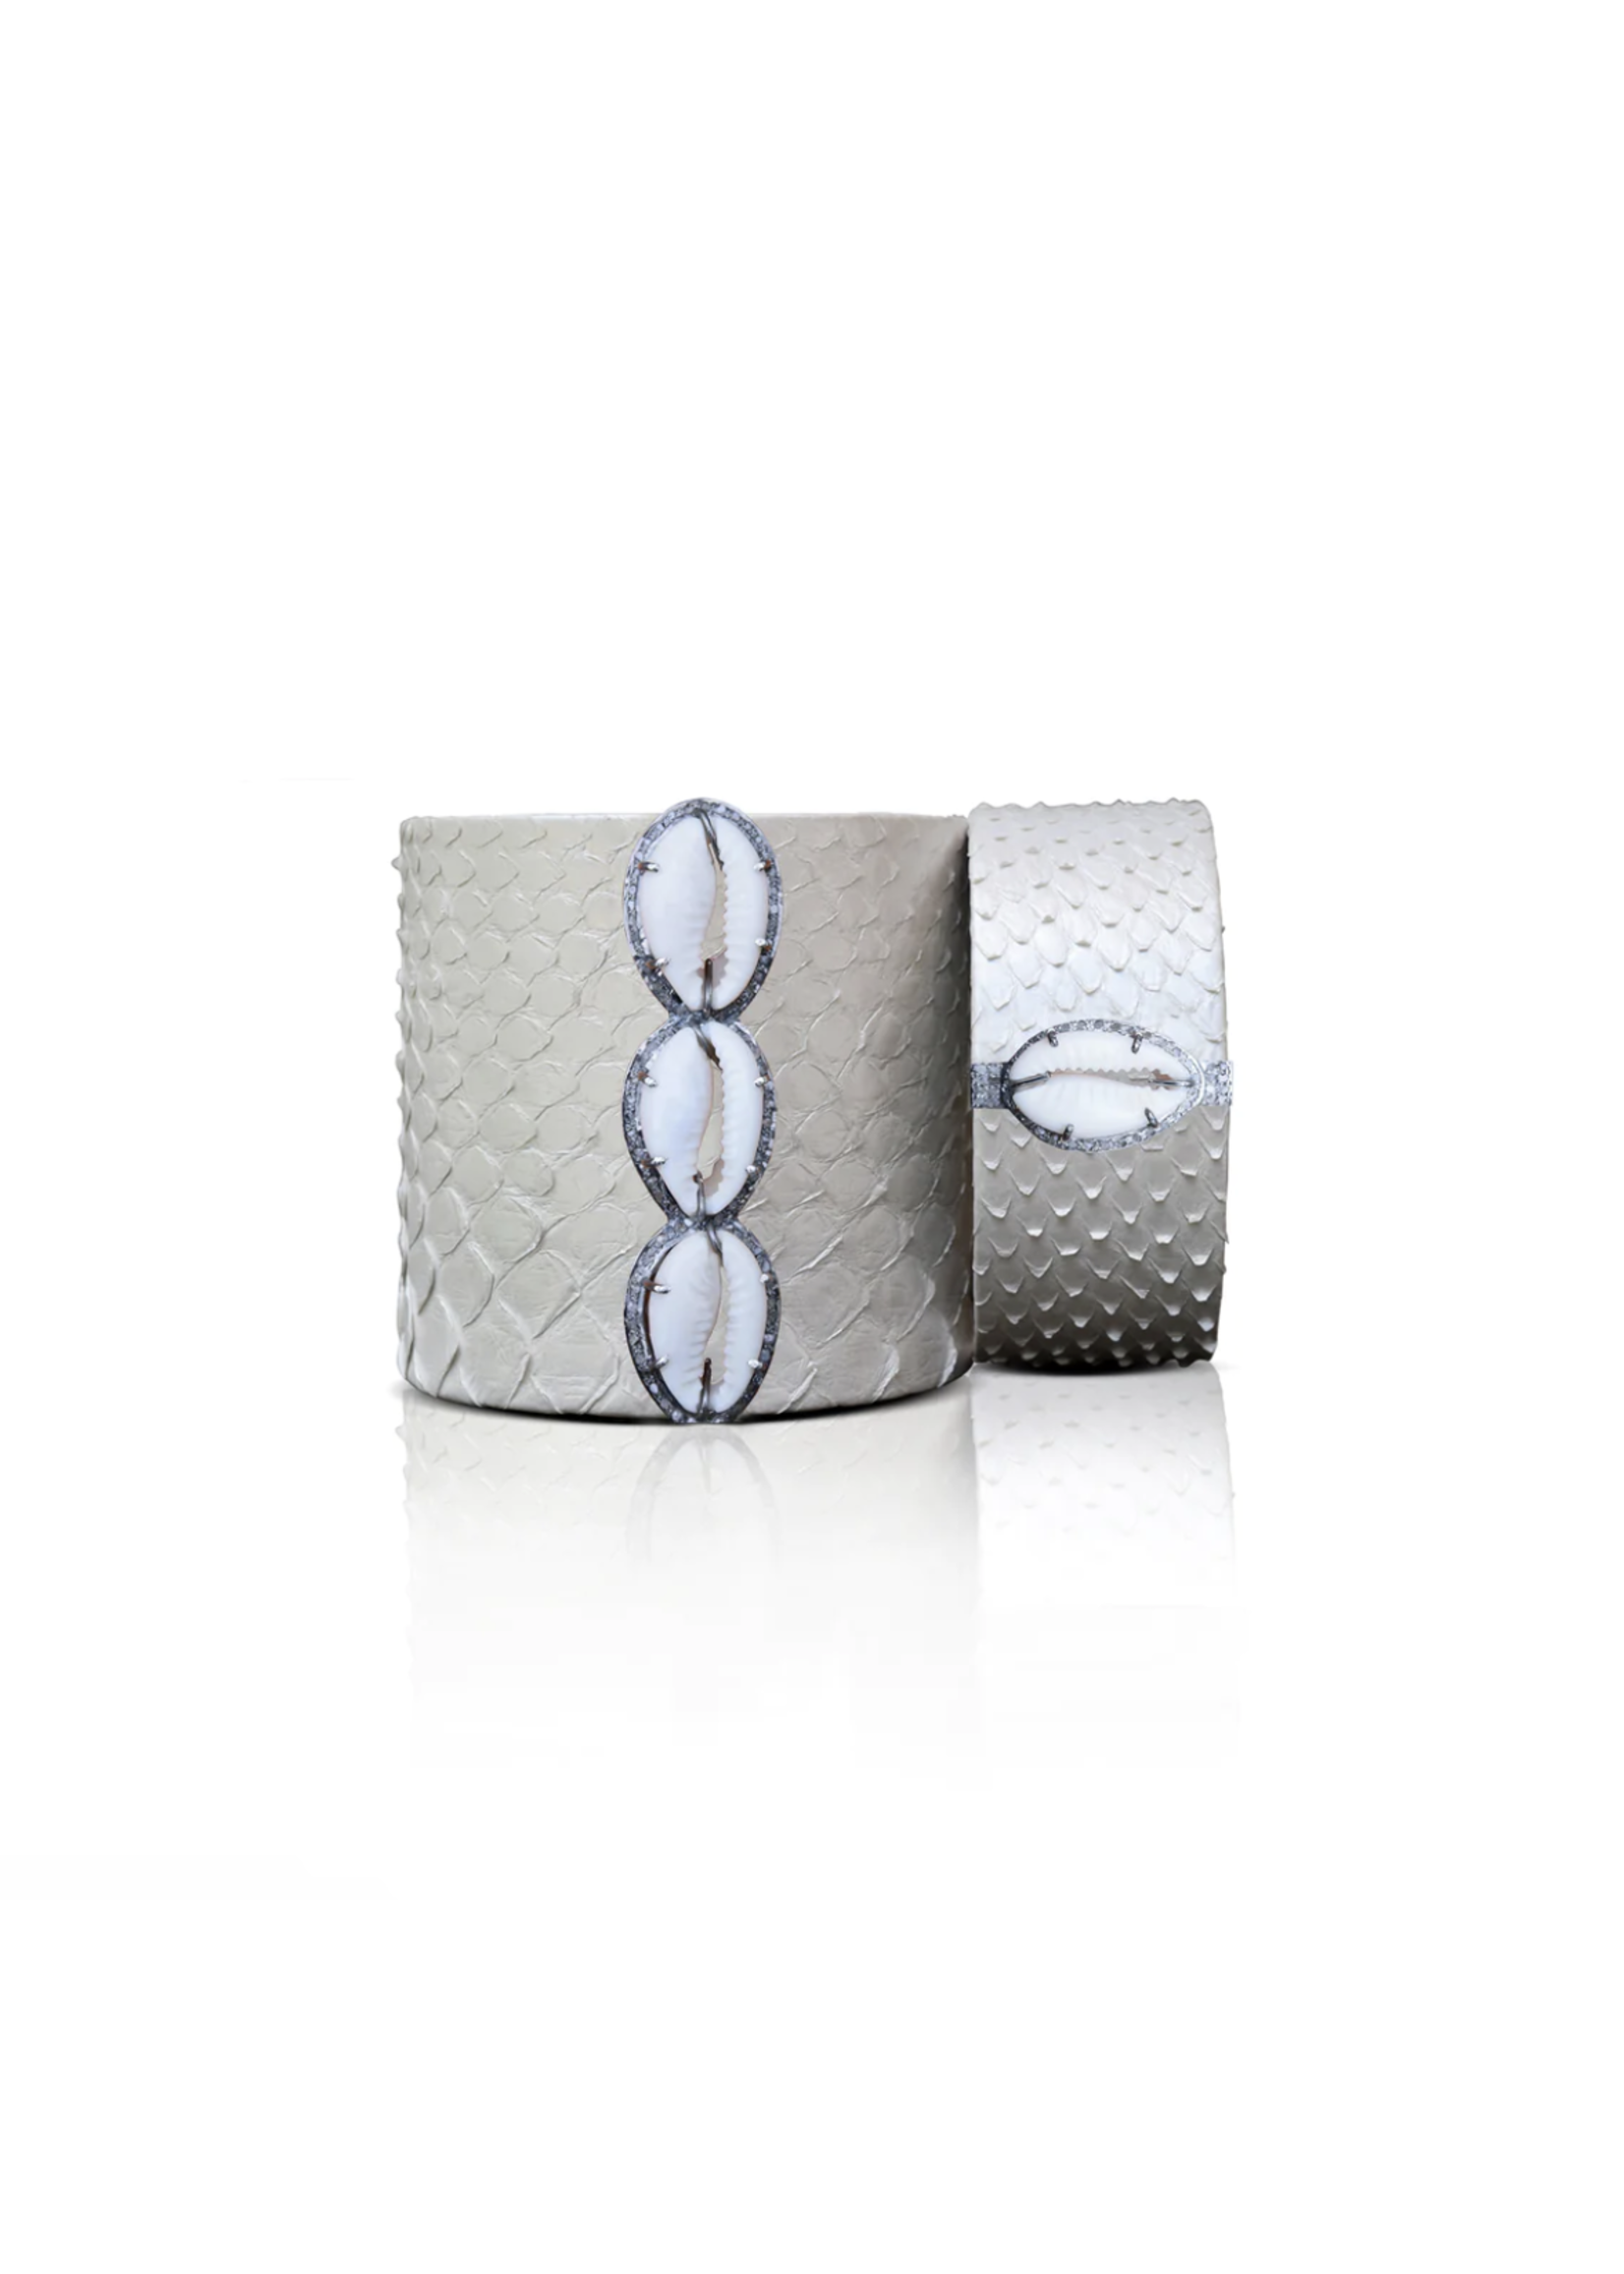 S. Carter Designs Large Pearl White Cowrie Python Cuff